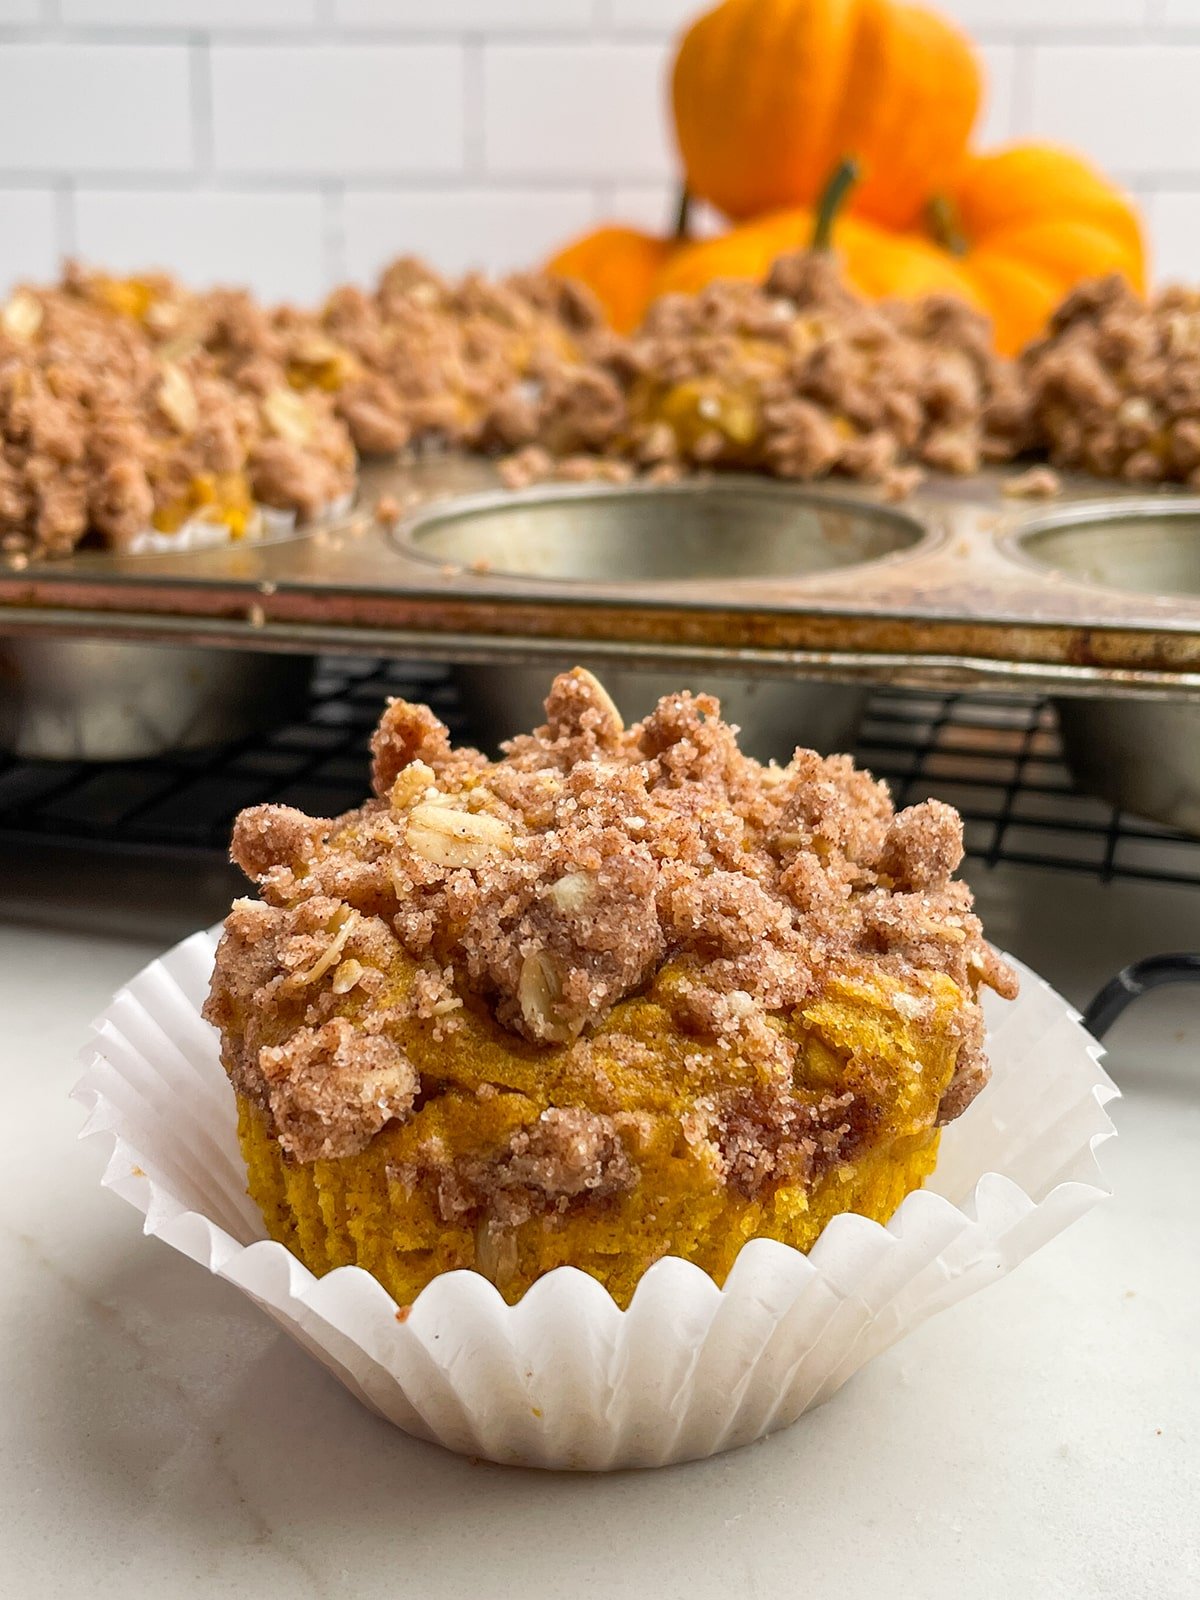 Pumpkin Snickerdoodle Muffin in a white paper muffin liner with pan of muffins in the background